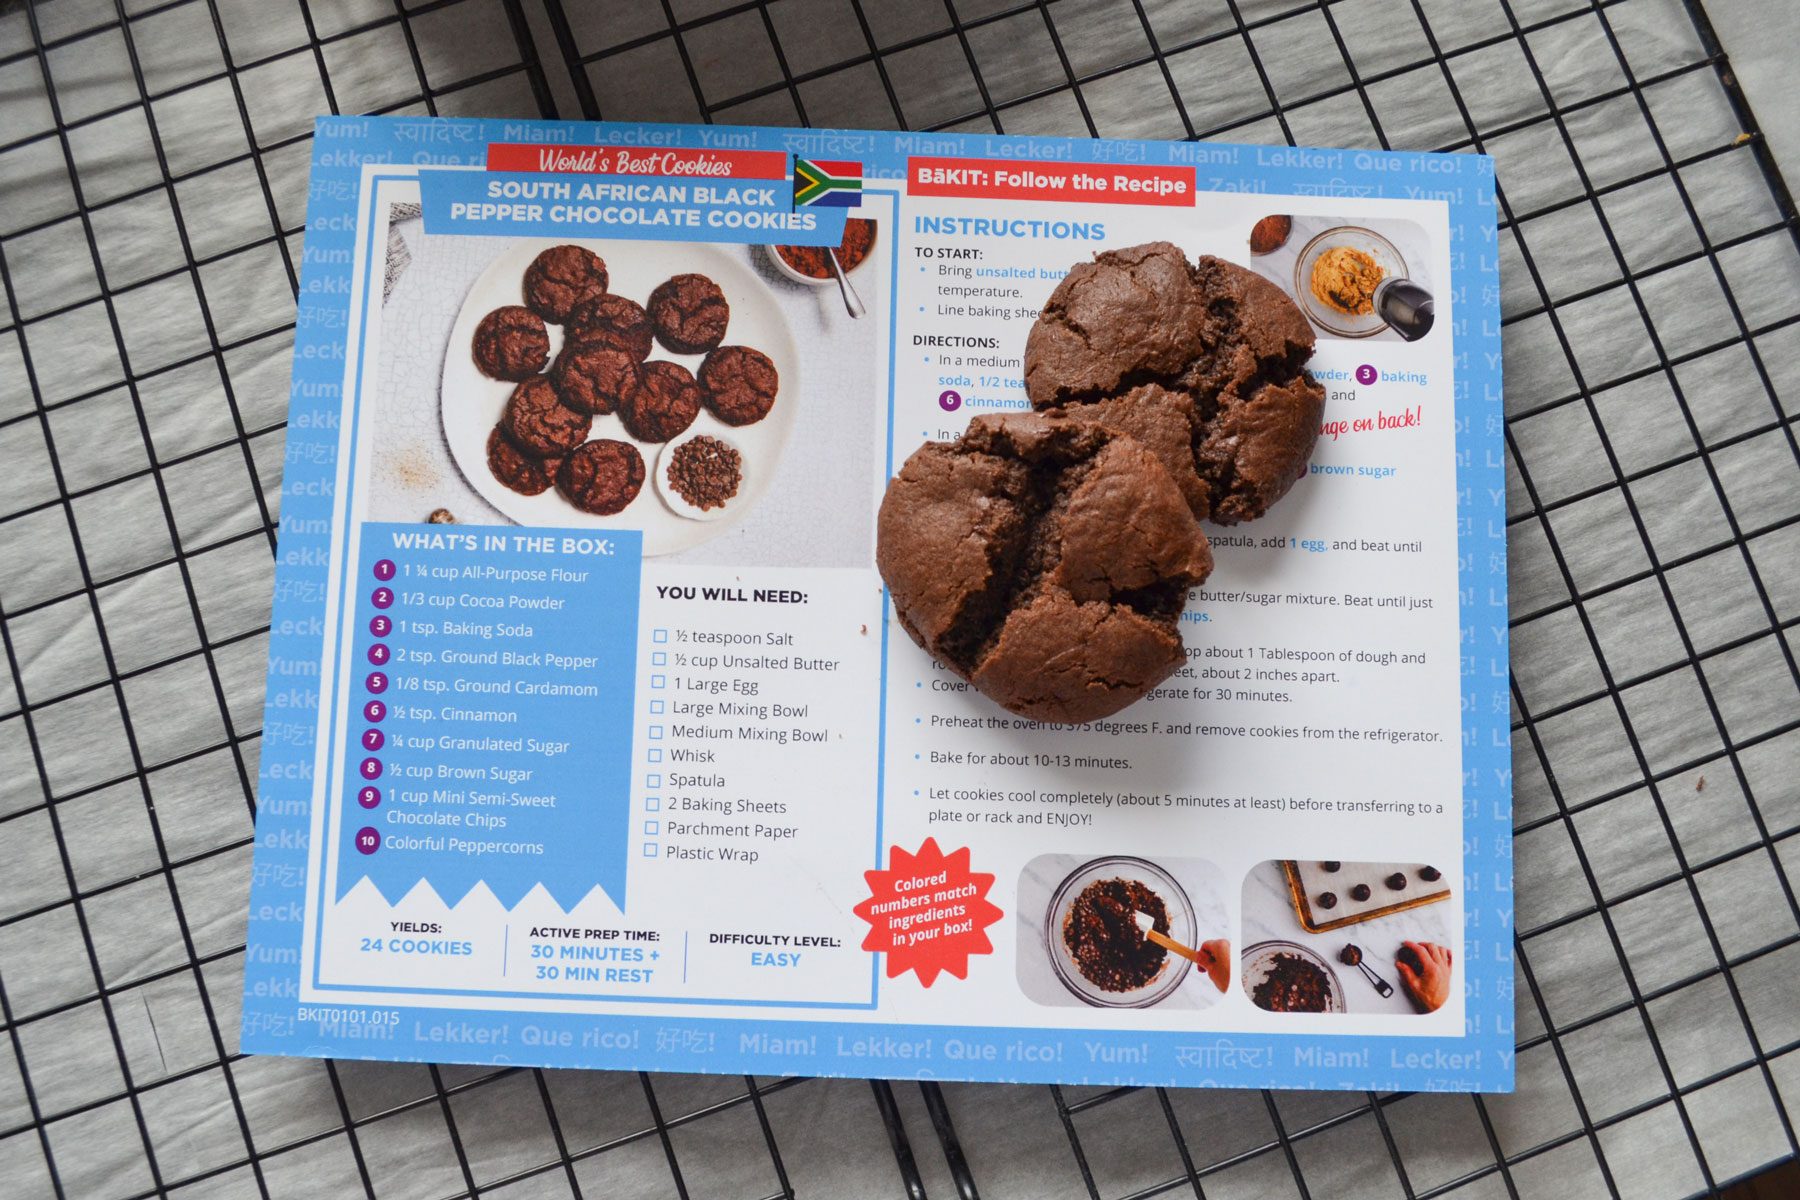 Chocolate cookies on a baking tray